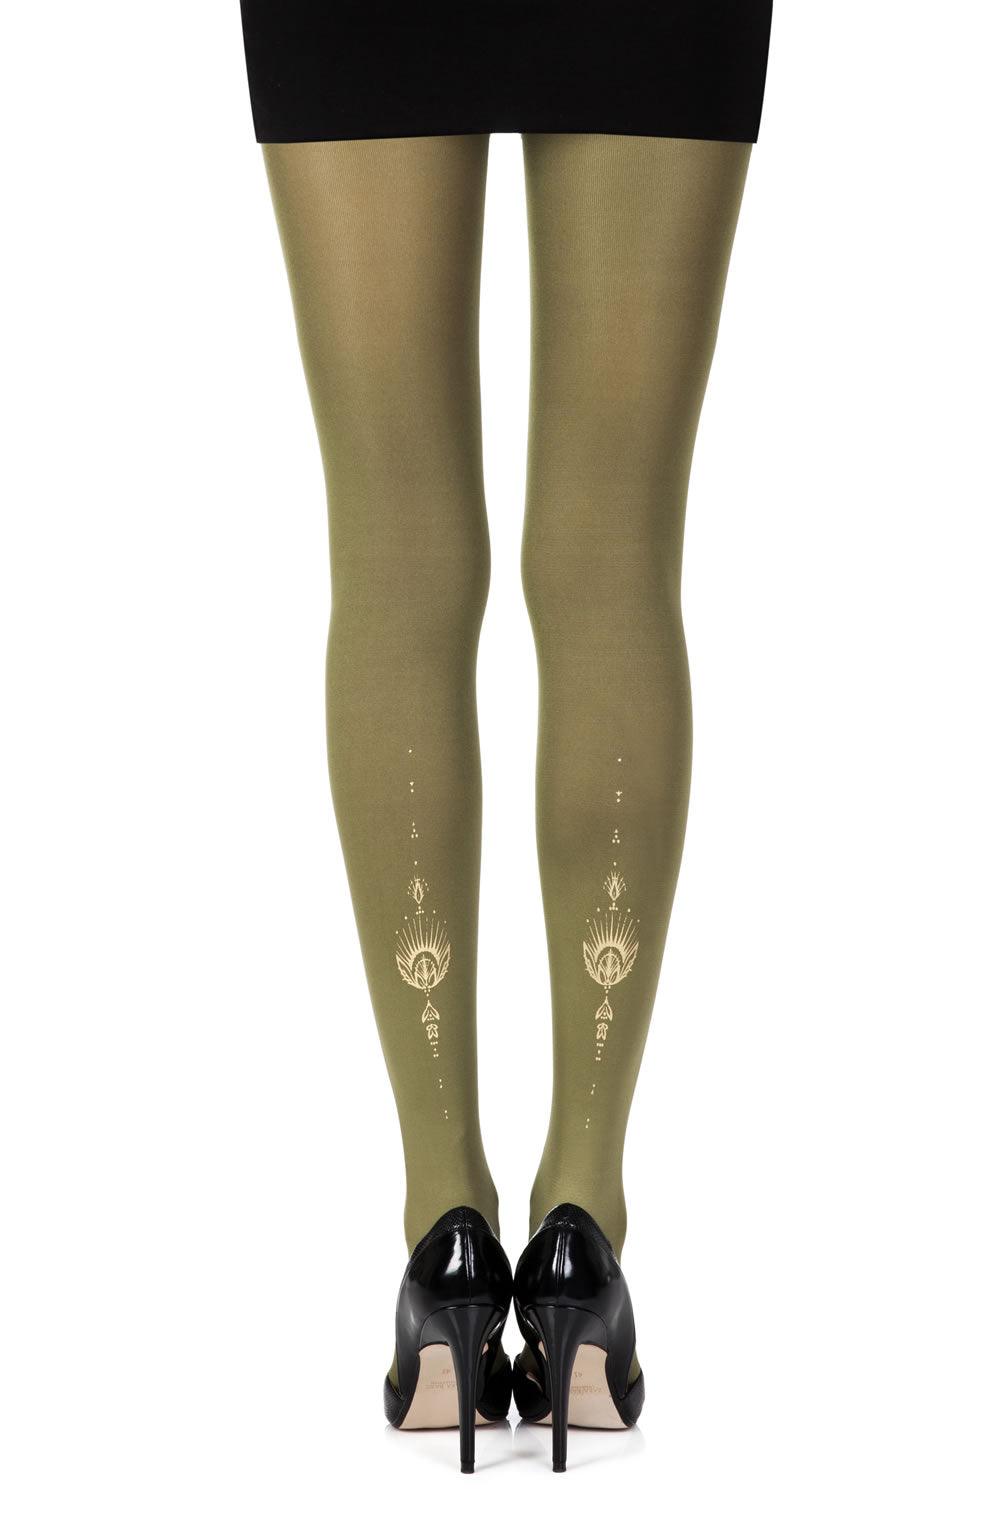 Zohara "Jewel In The Night" Green Print Tights - Sydney Rose Lingerie 